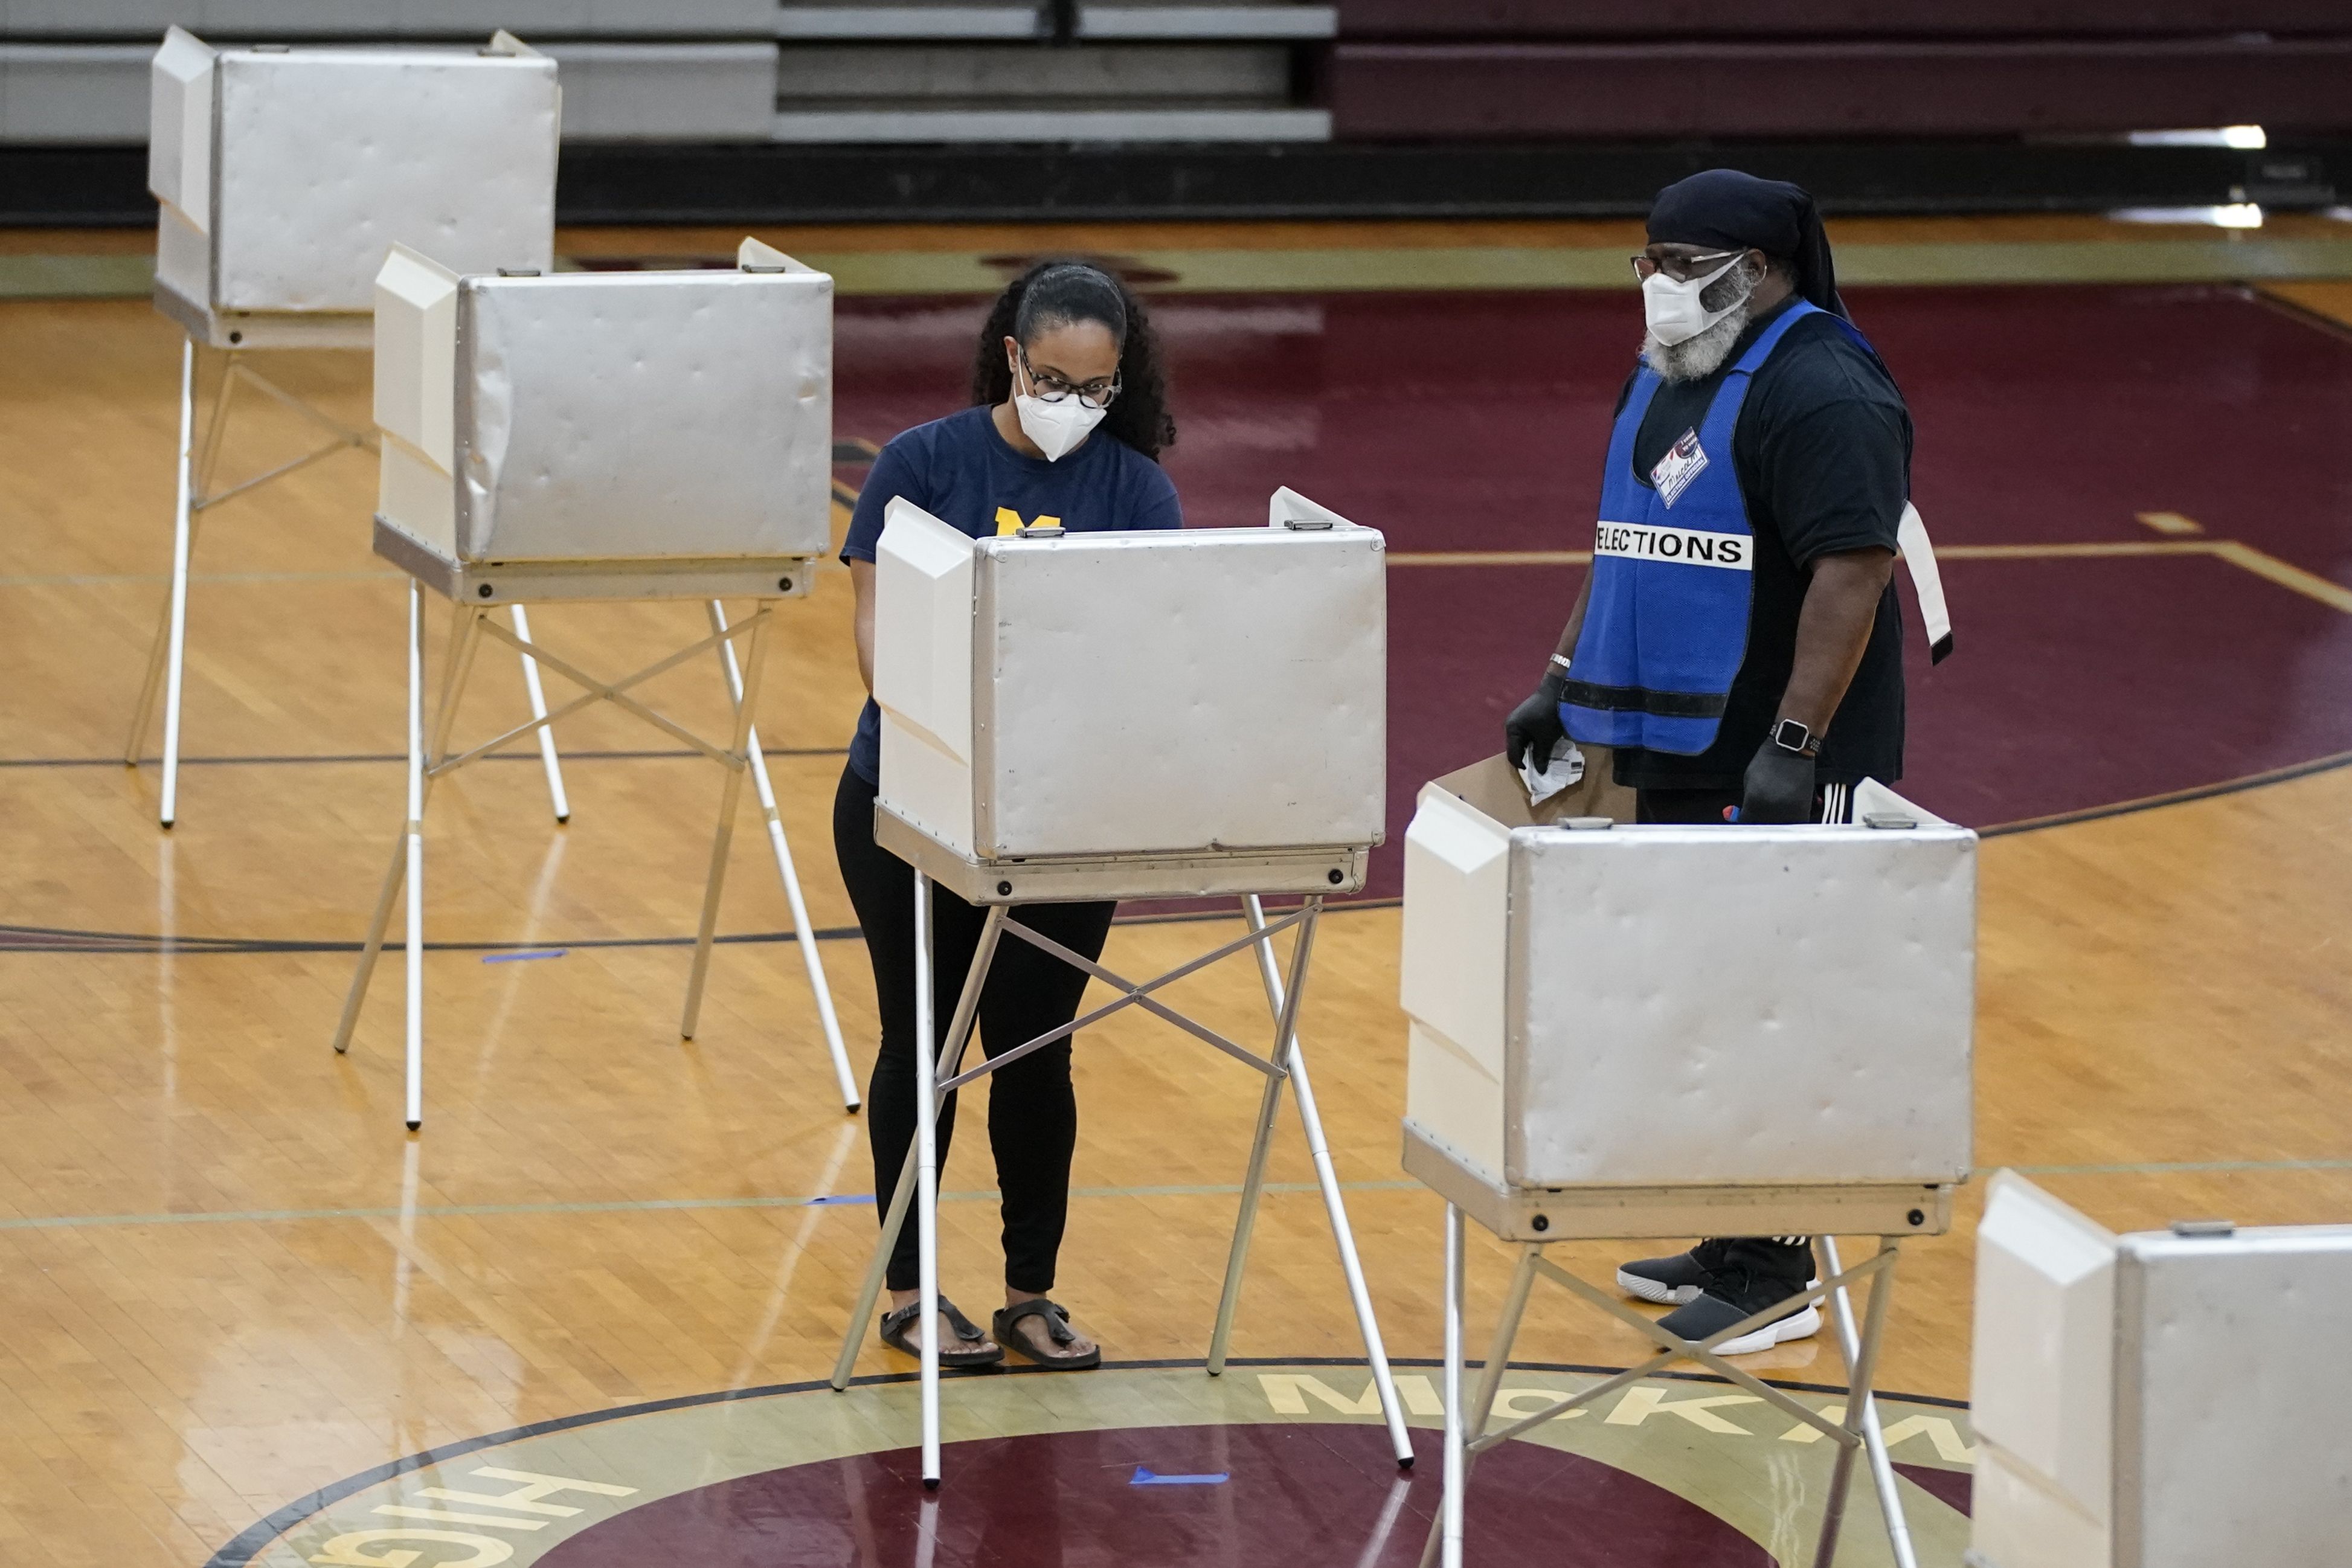 A woman votes in a gym while wearing a face mask